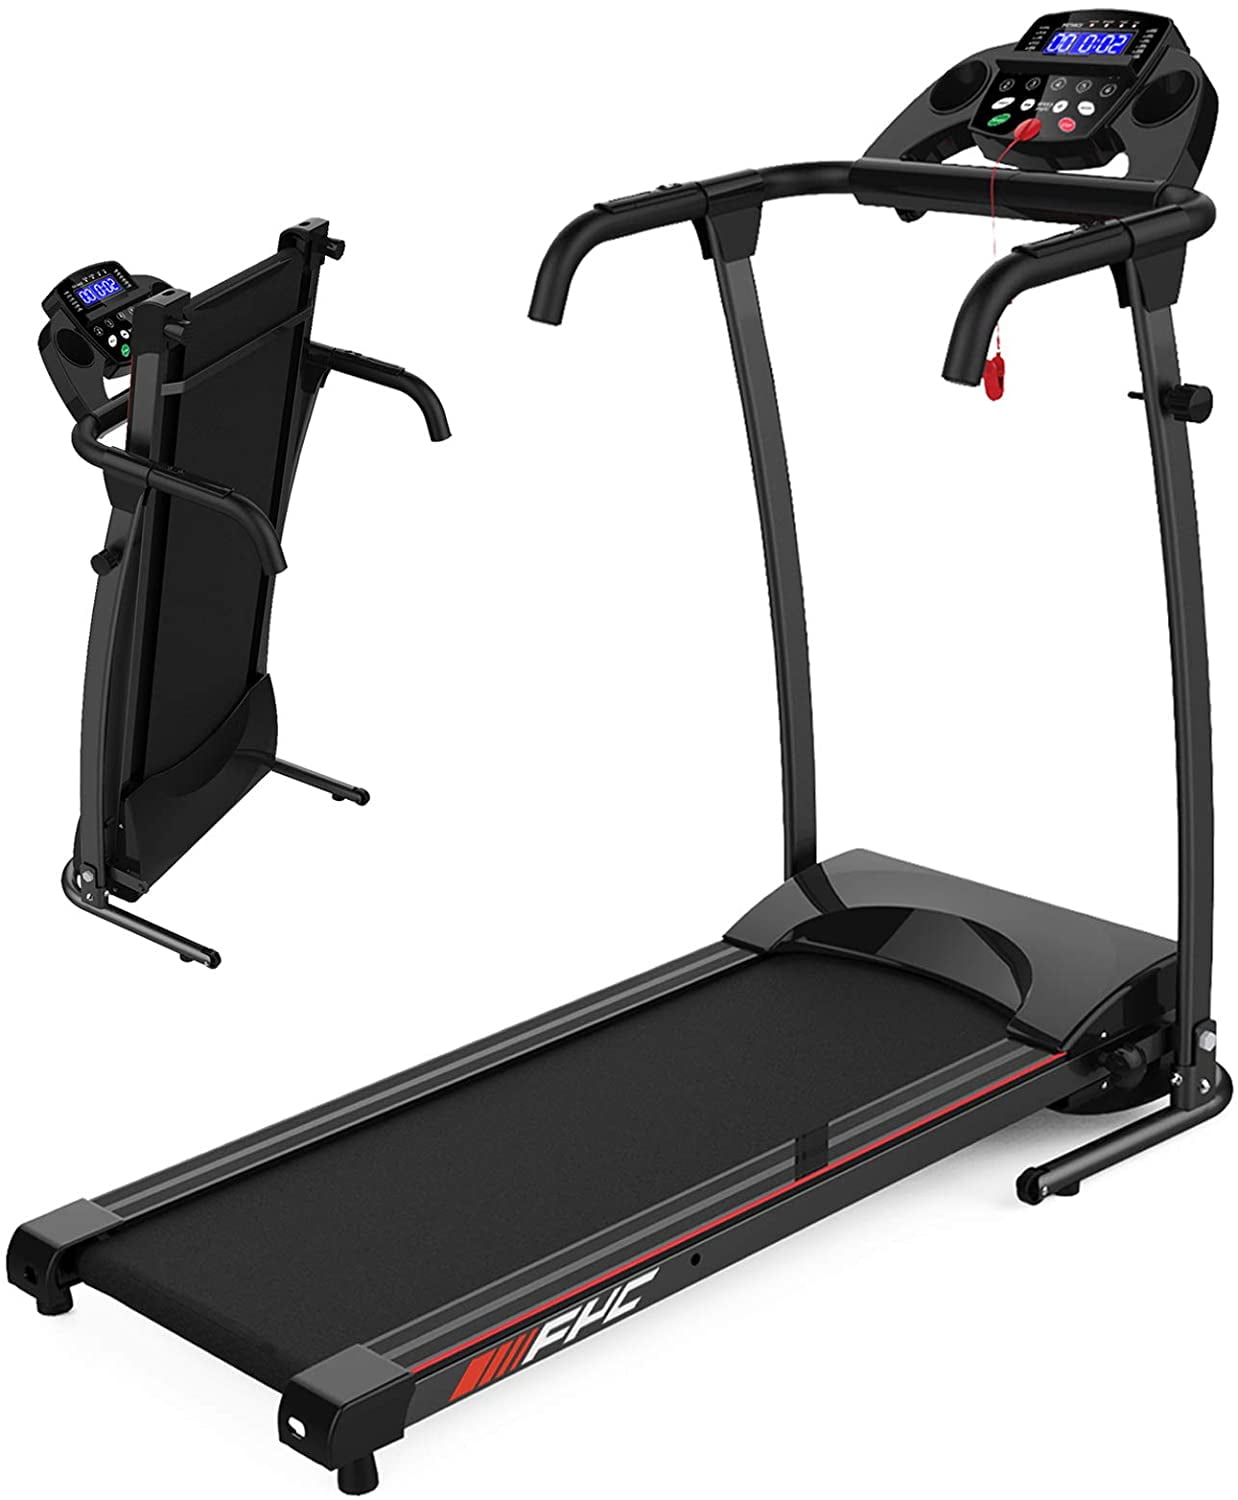 FYC Treadmill Folding Treadmill for Home Portable Electric Motorized Treadmill Running Exercise Machine Compact Treadmill for Home Gym Fitness Workout Jogging Walking No Installation Required 